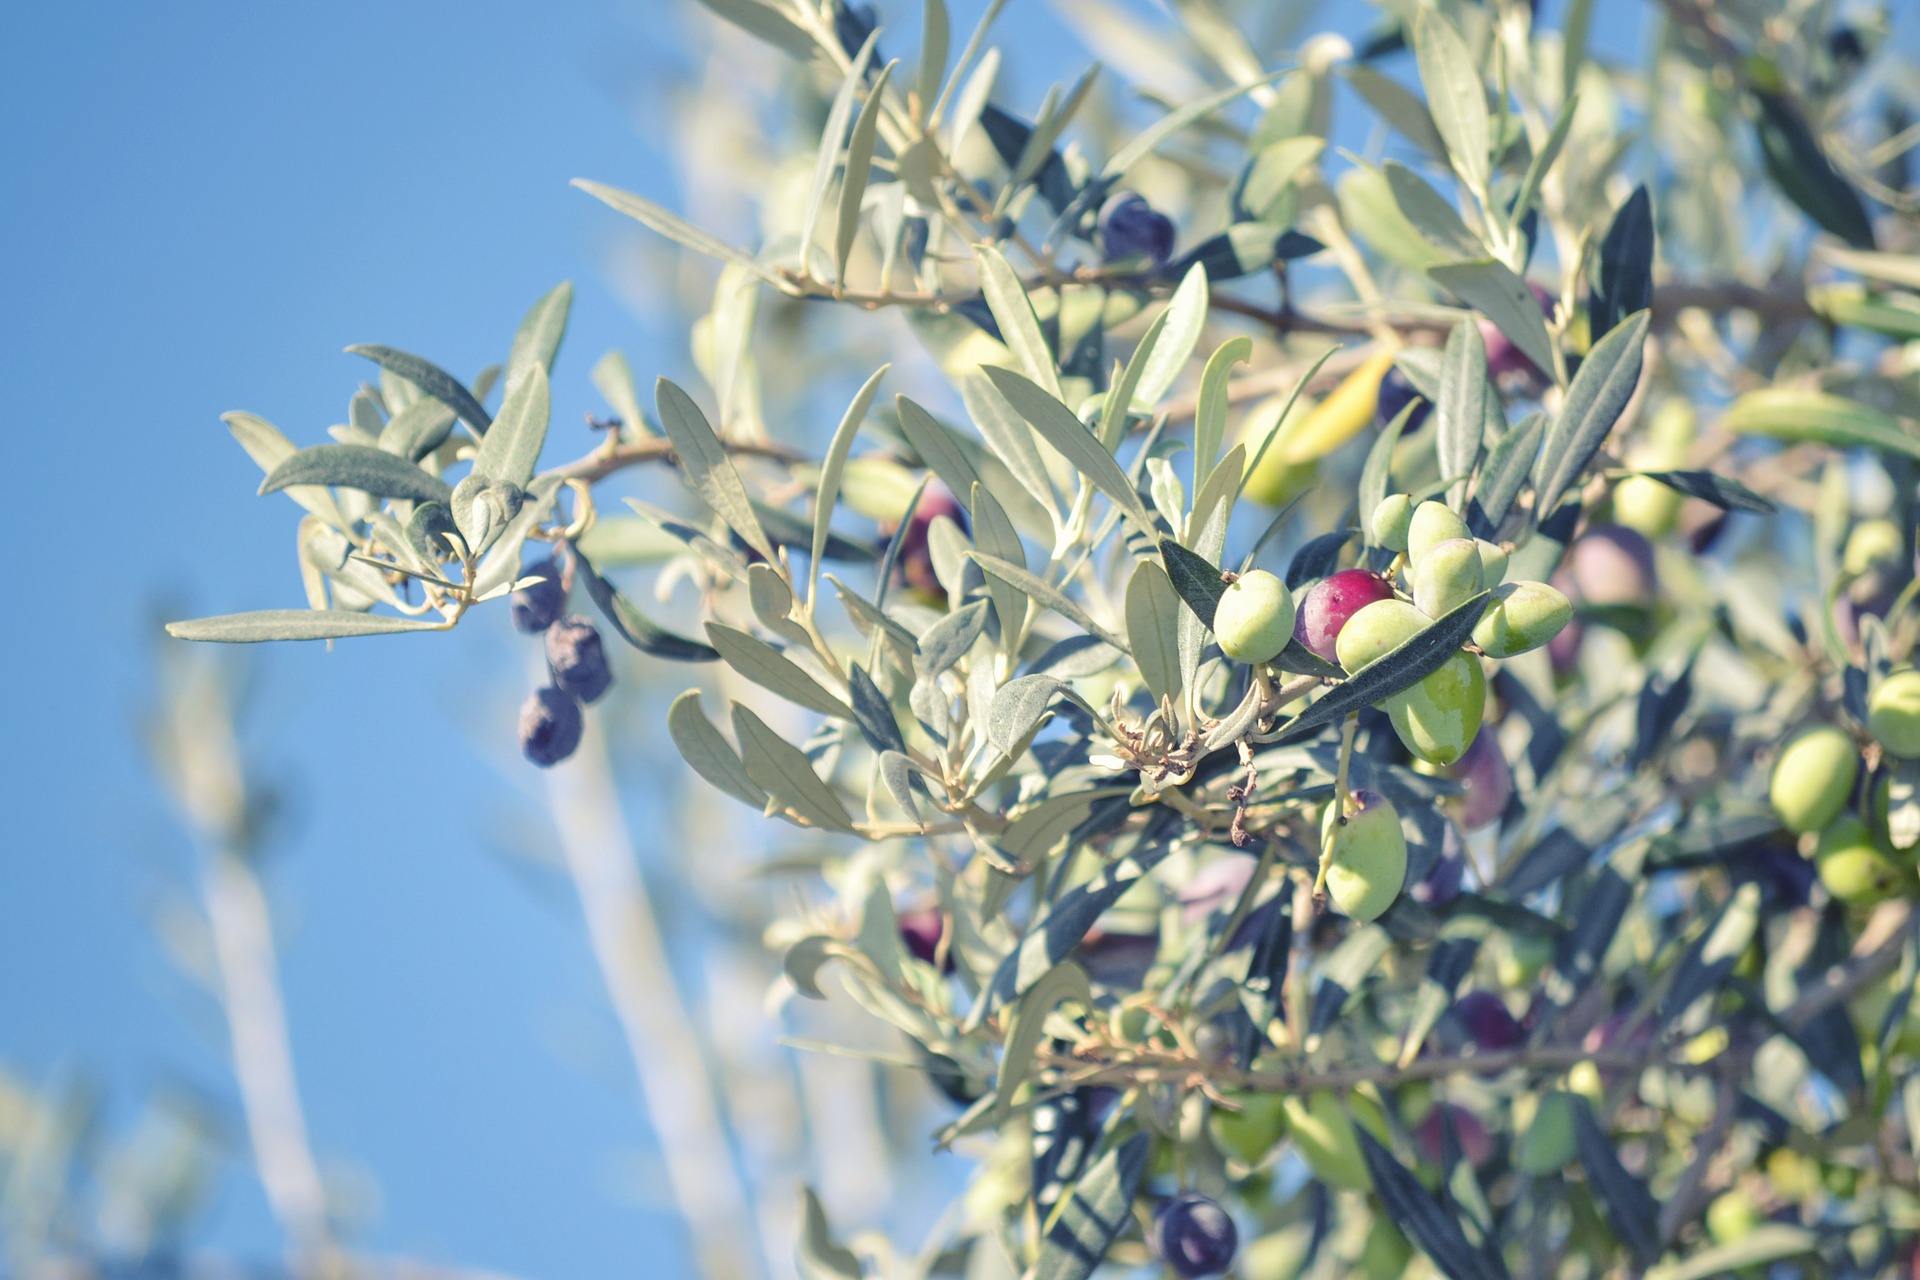 Bondi olive trees bear fruit and foster neighbourhood connection